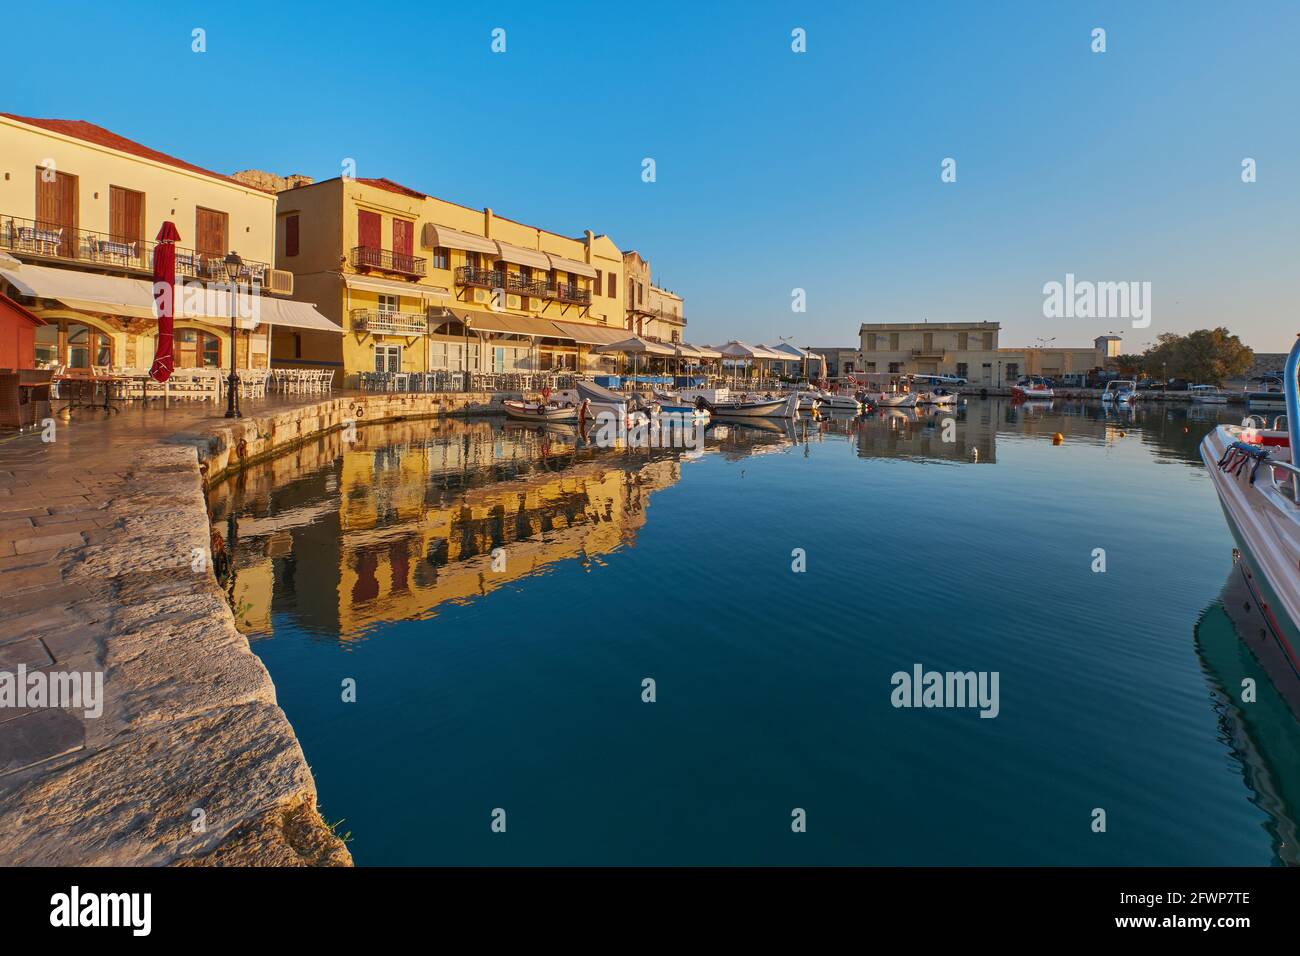 the quay of the historic port of Rethimno in the morning sun, boats in the port and empty restaurants Stock Photo